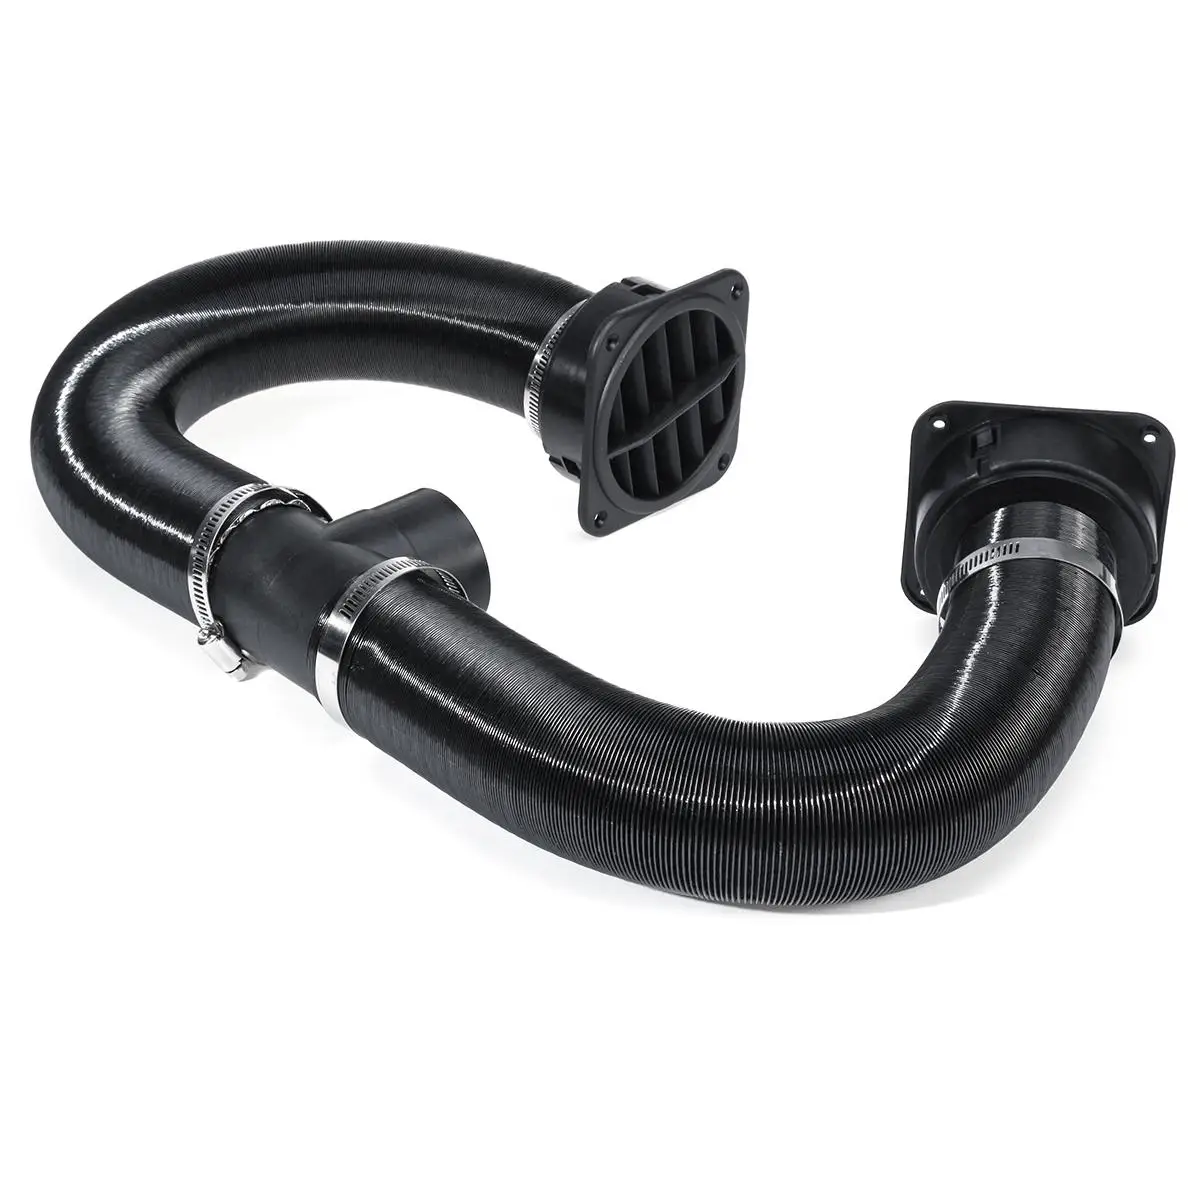 60/75mm Car Heater Replacement Kits Air Diesel Parking Heater Ducting Pipe Air Vent Outlet Hose Tube Connector w/Hose Clips